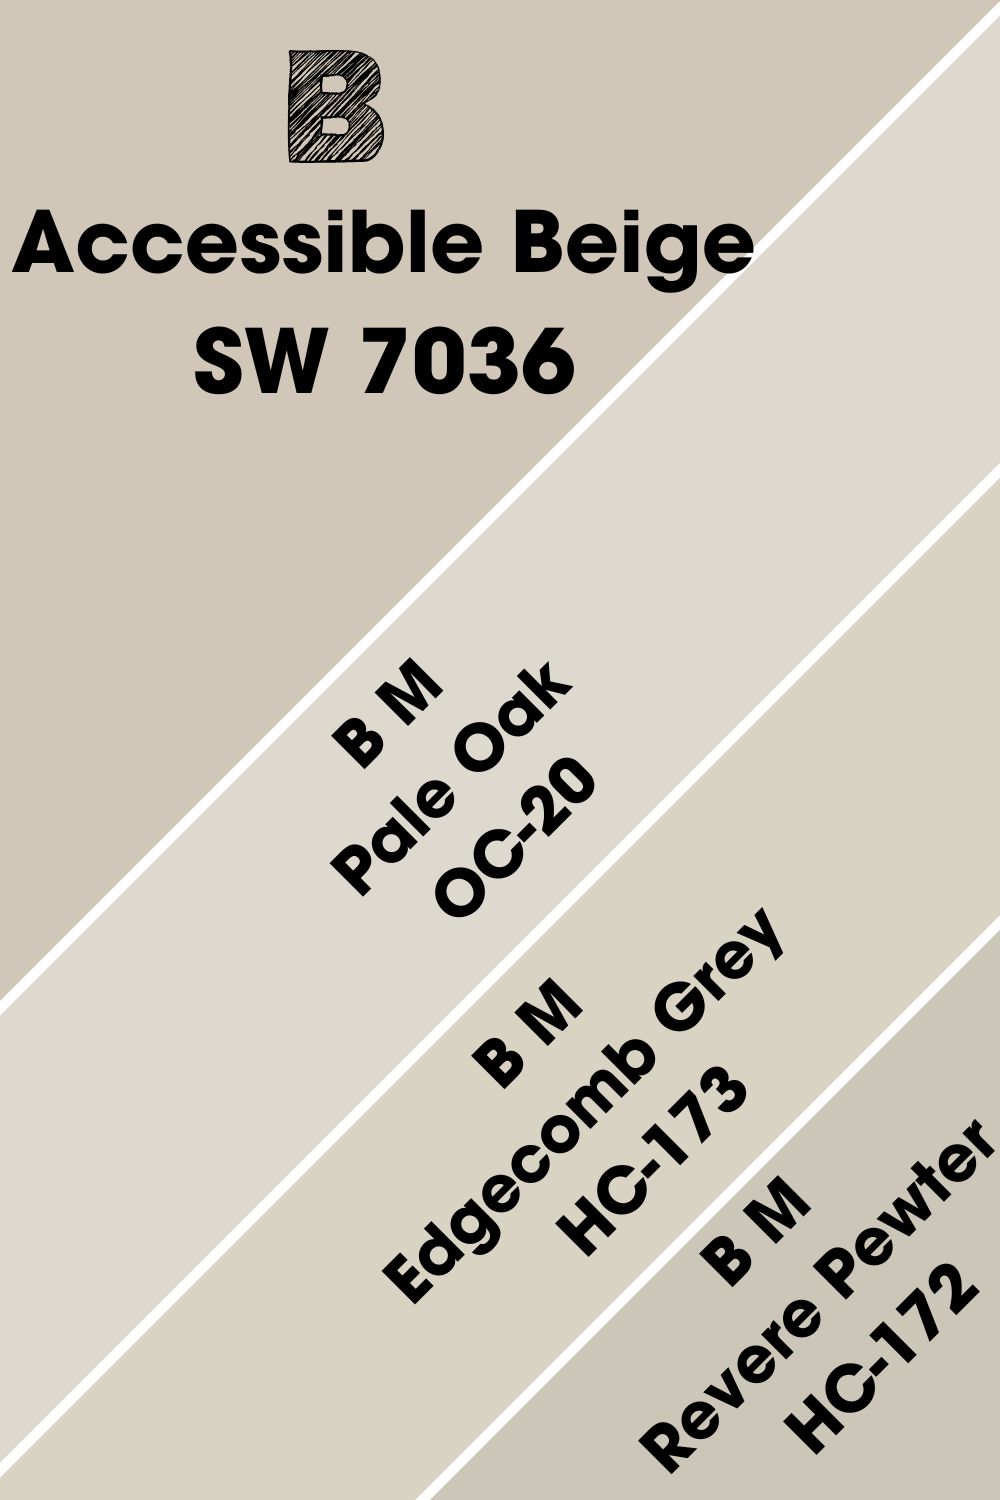 Benjamin Moore Paint Color Equivalent to SW Accessible Beige